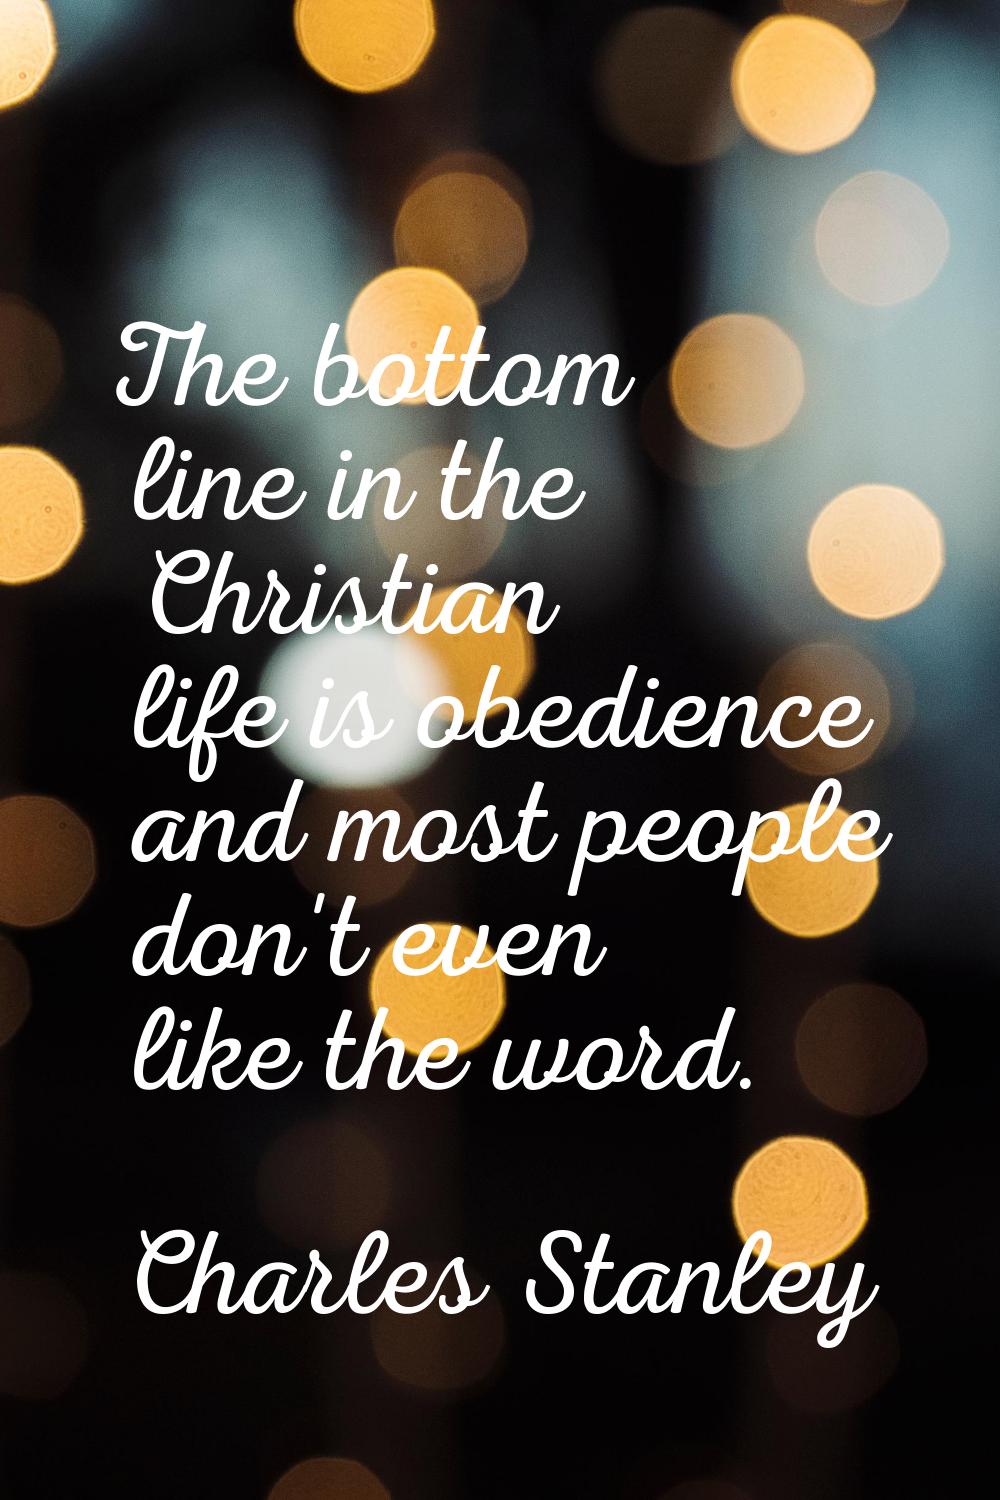 The bottom line in the Christian life is obedience and most people don't even like the word.